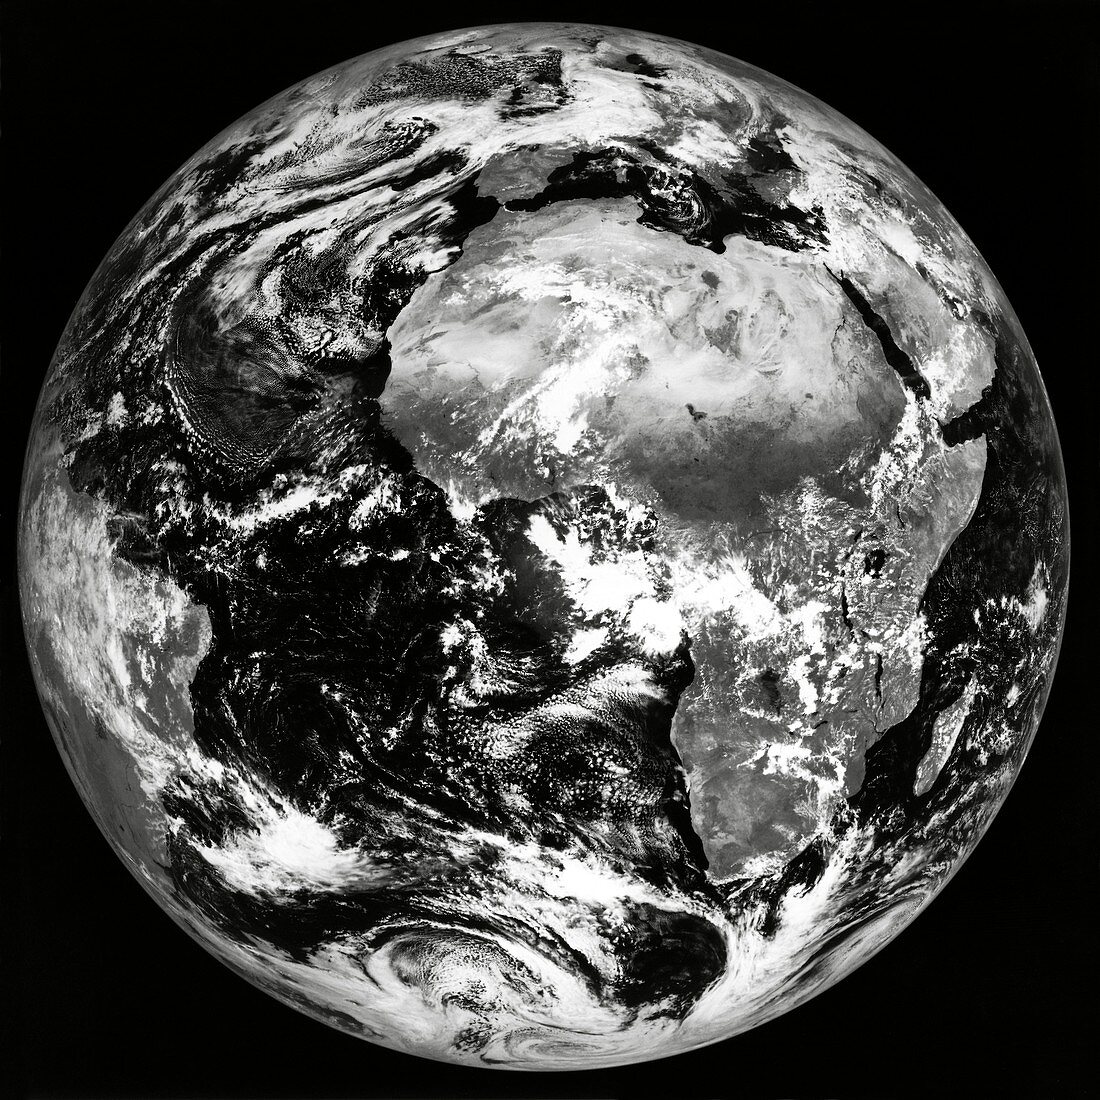 Meteosat image of the whole Earth